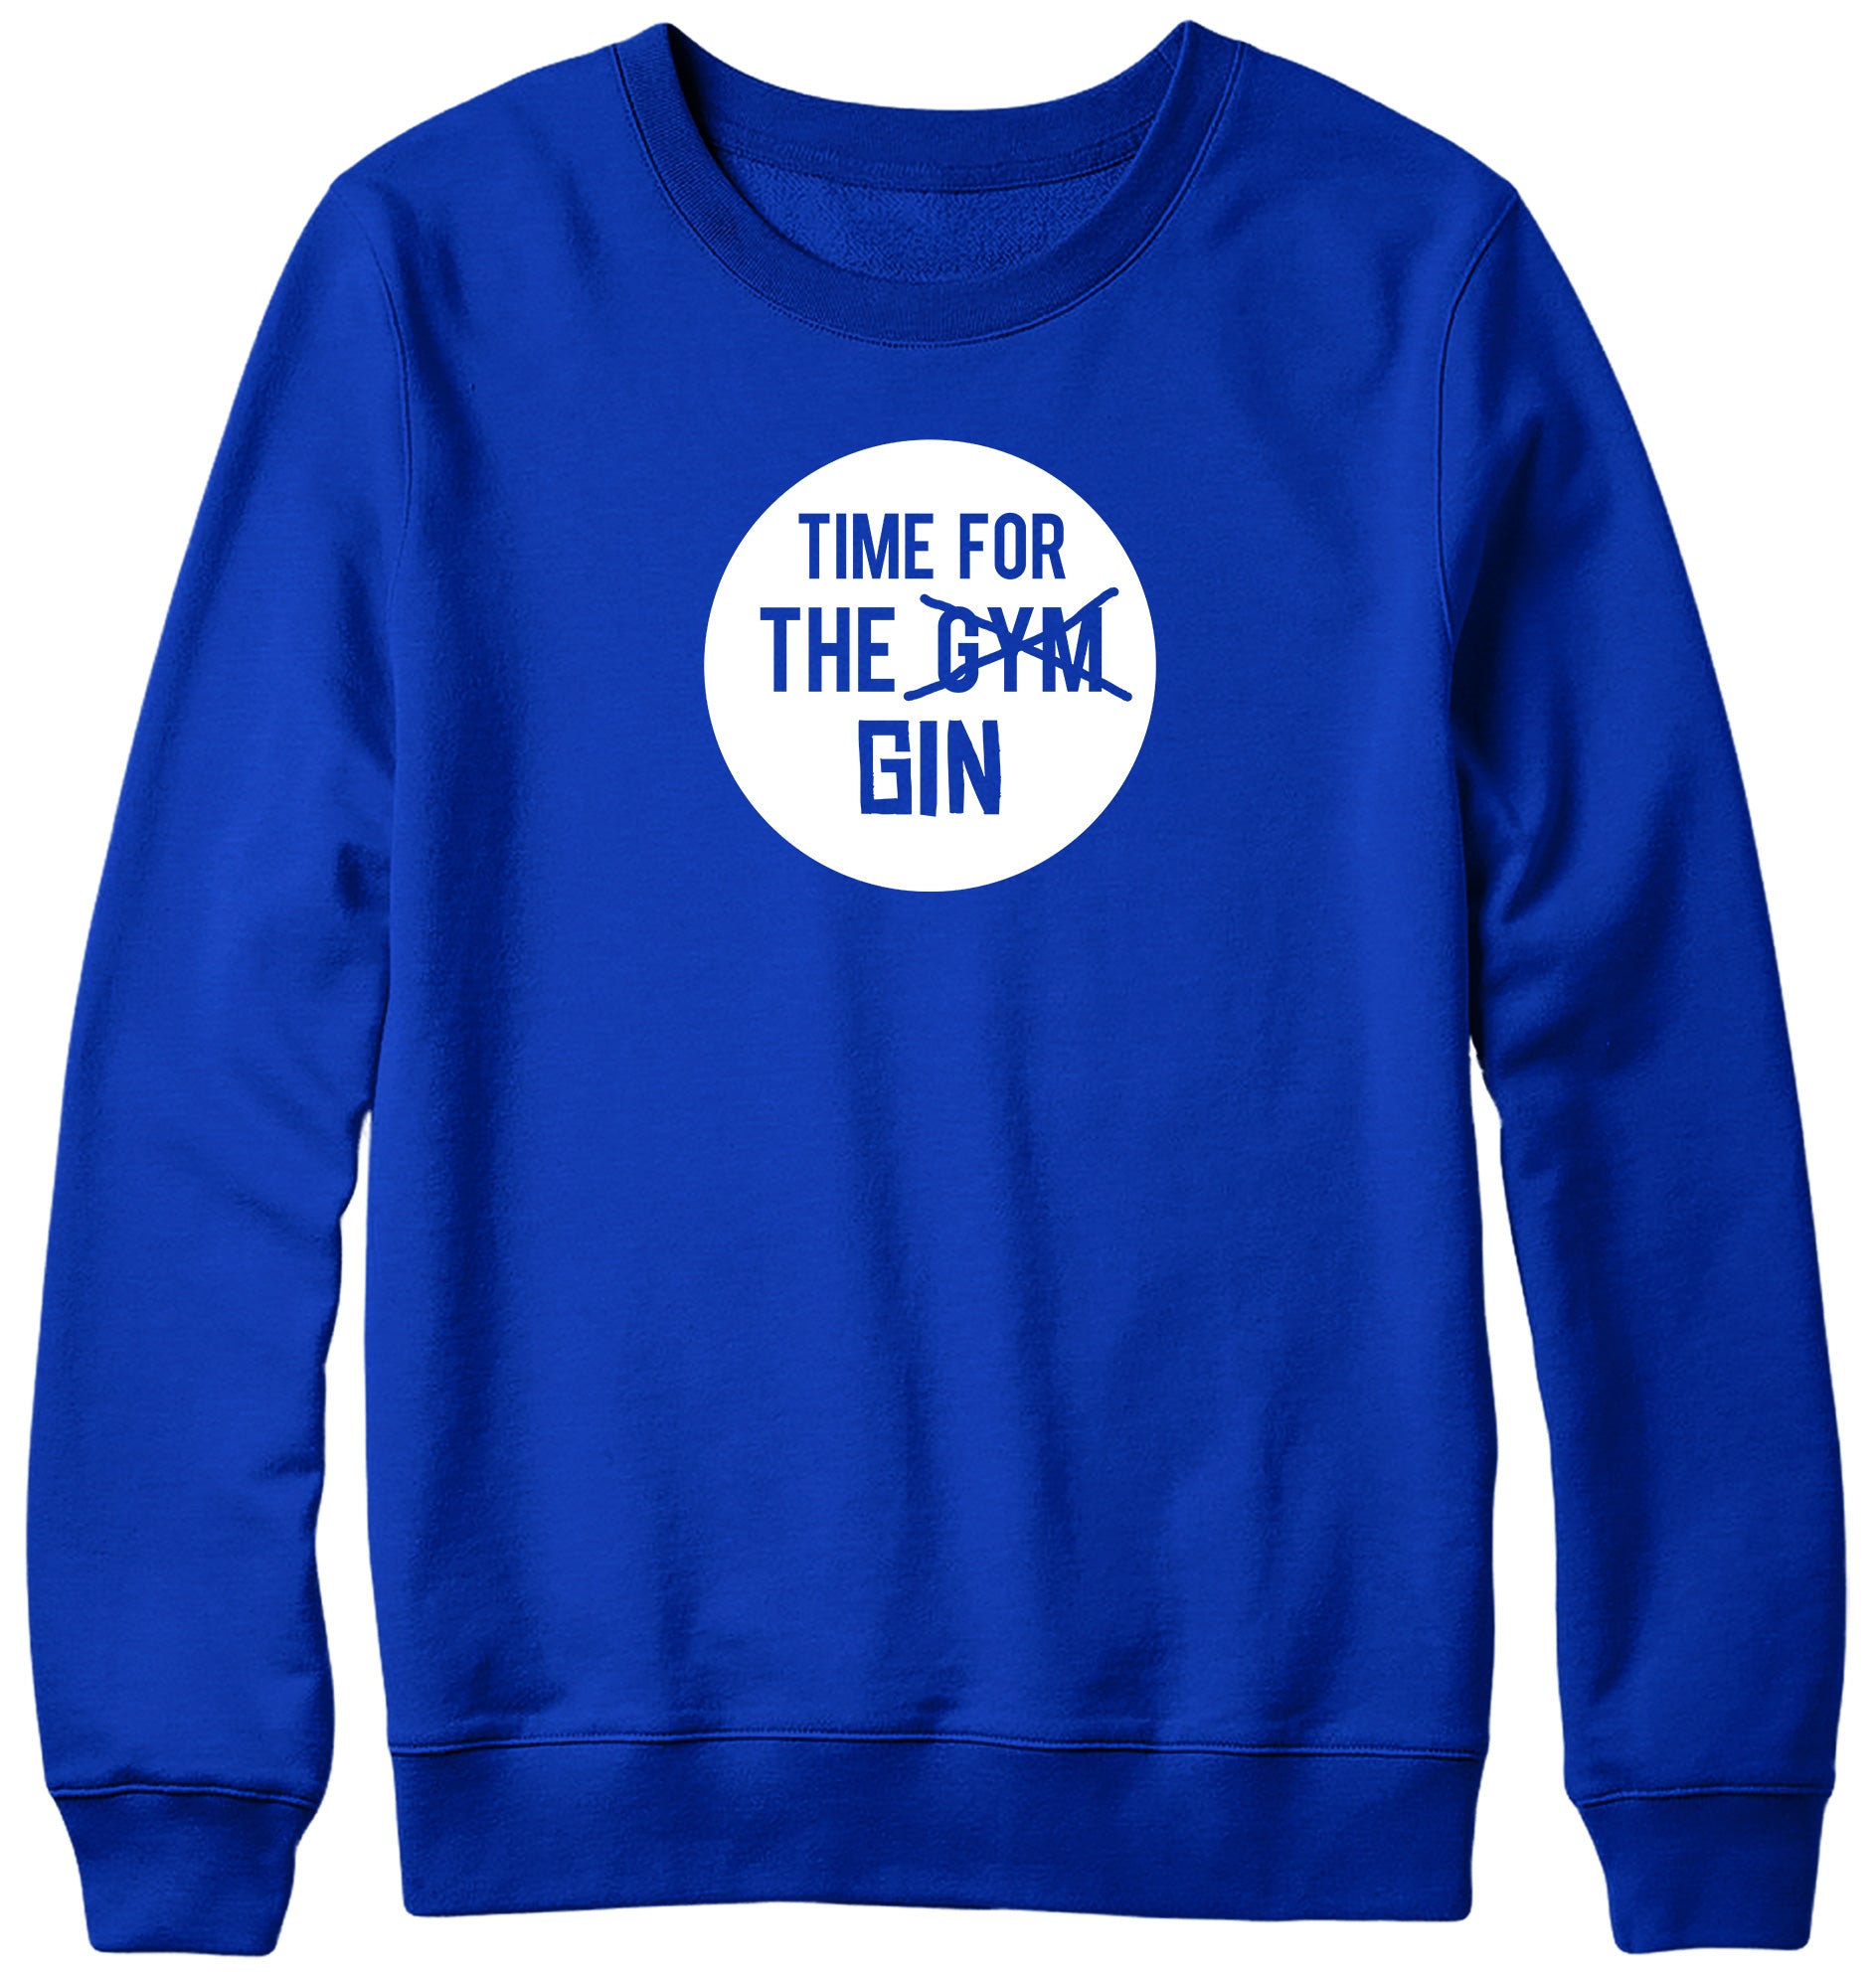 TIME FOR THE GIN WOMENS LADIES MENS UNISEX SWEATSHIRT